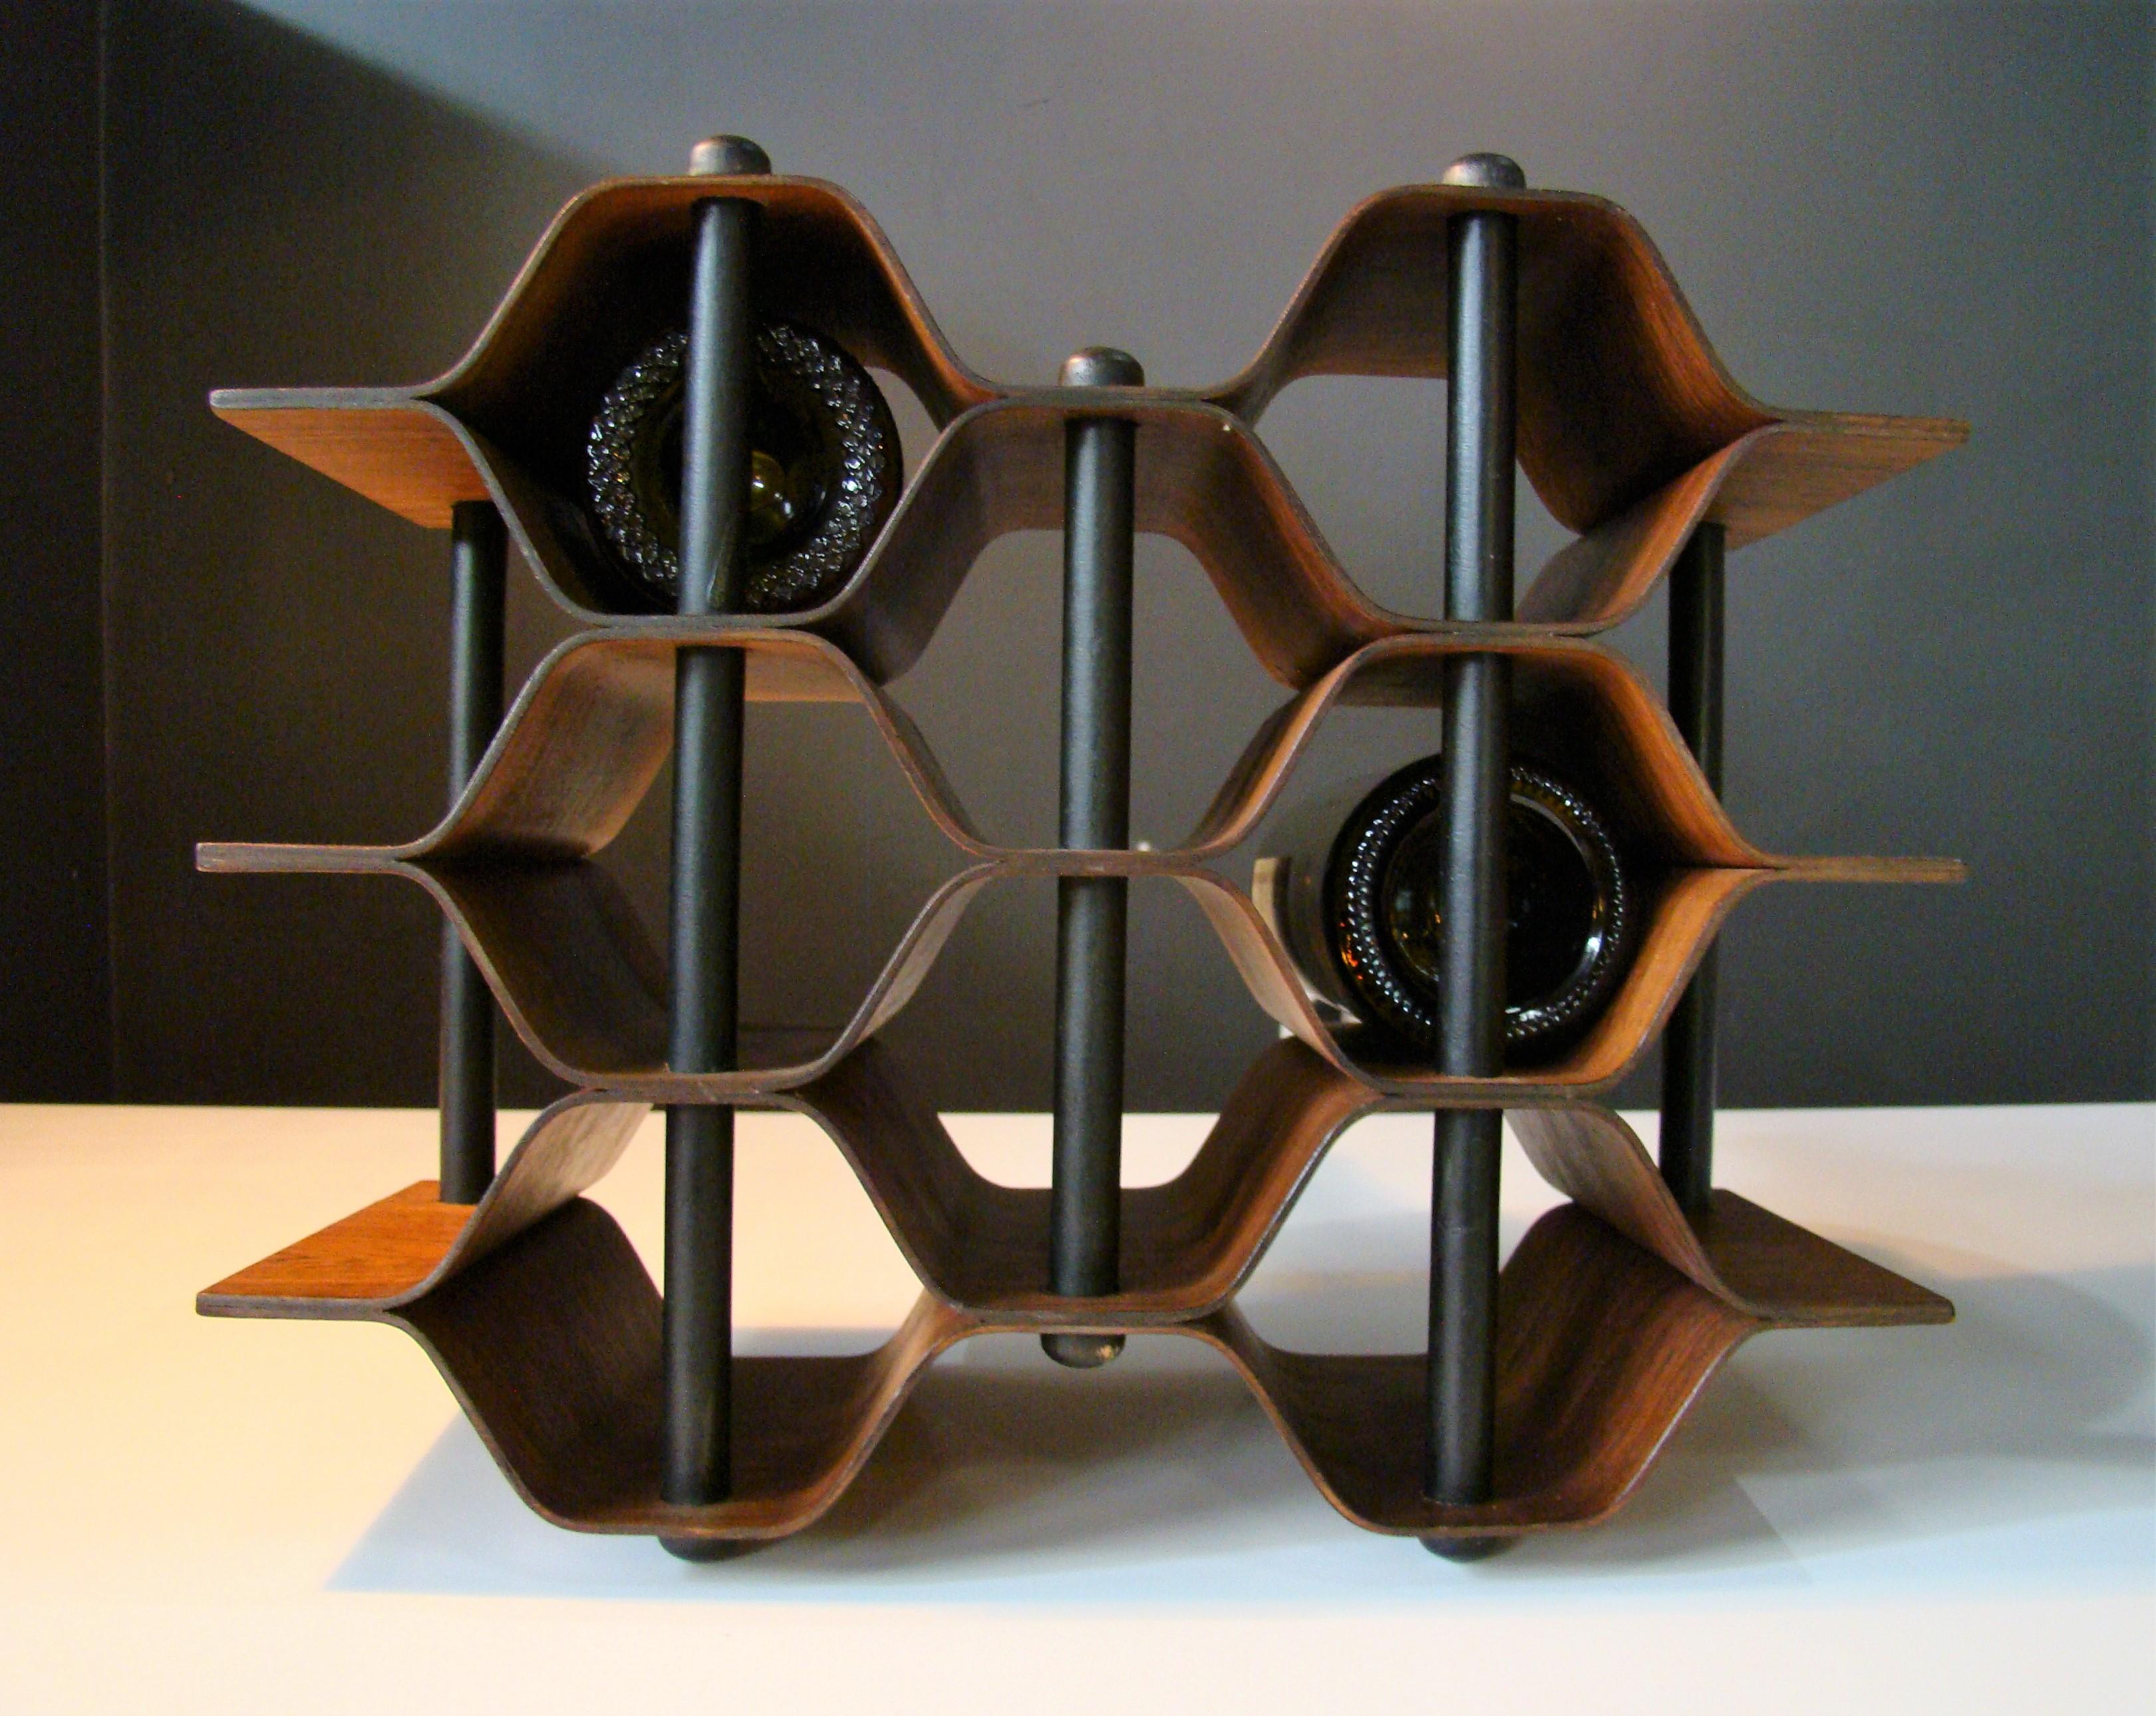 Vintage rosewood bottle holder designed by Swedish sculpture Torsten Johansson c. 1960, this 8-bottle wine rack is constructed of pressure formed, nicely figured rosewood and blackened steel supports. Beautiful and functional. A perfect addition to